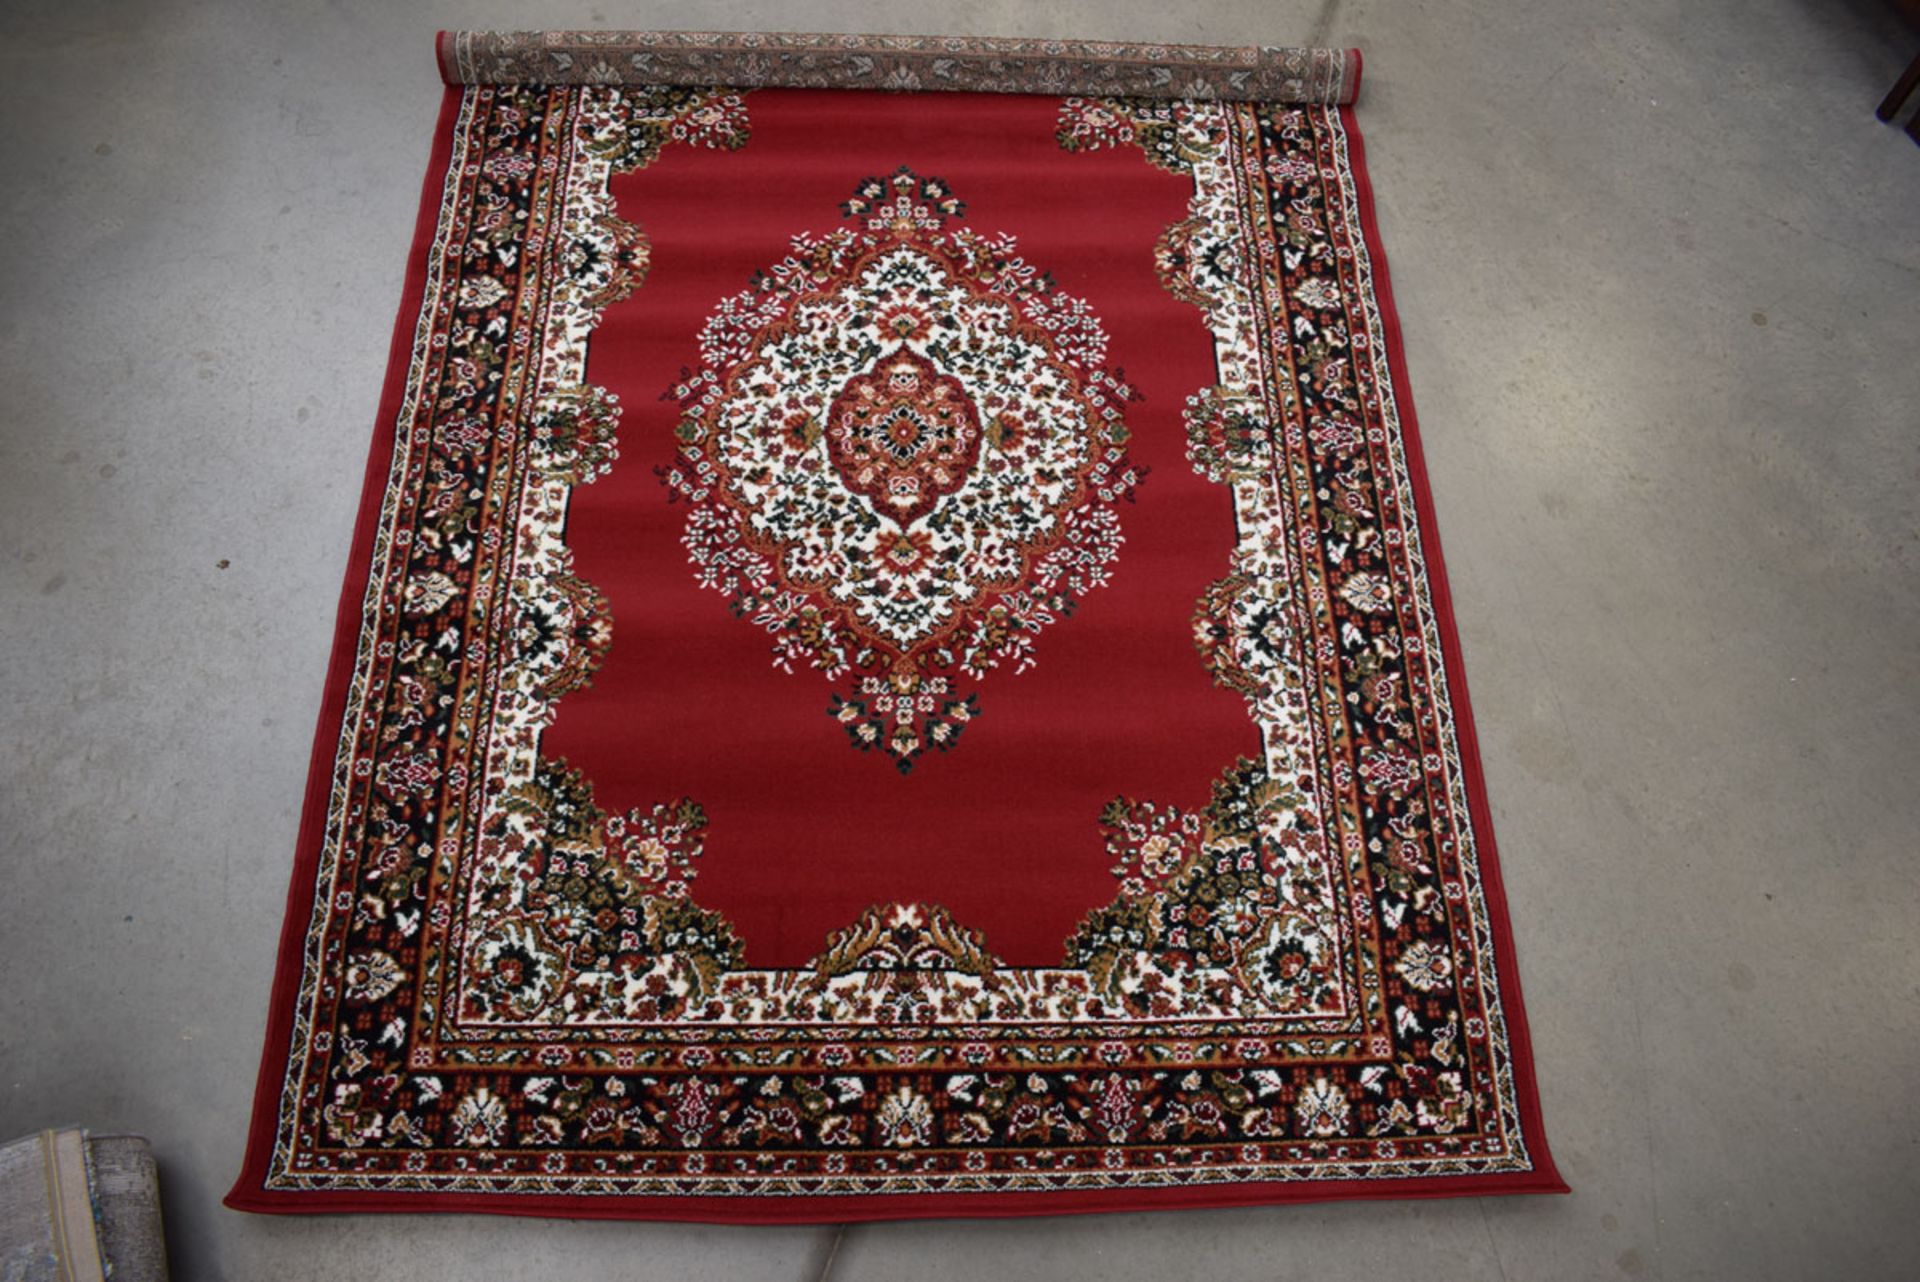 A modern Argos carpet in the Persian style, approx 180 x 230cm